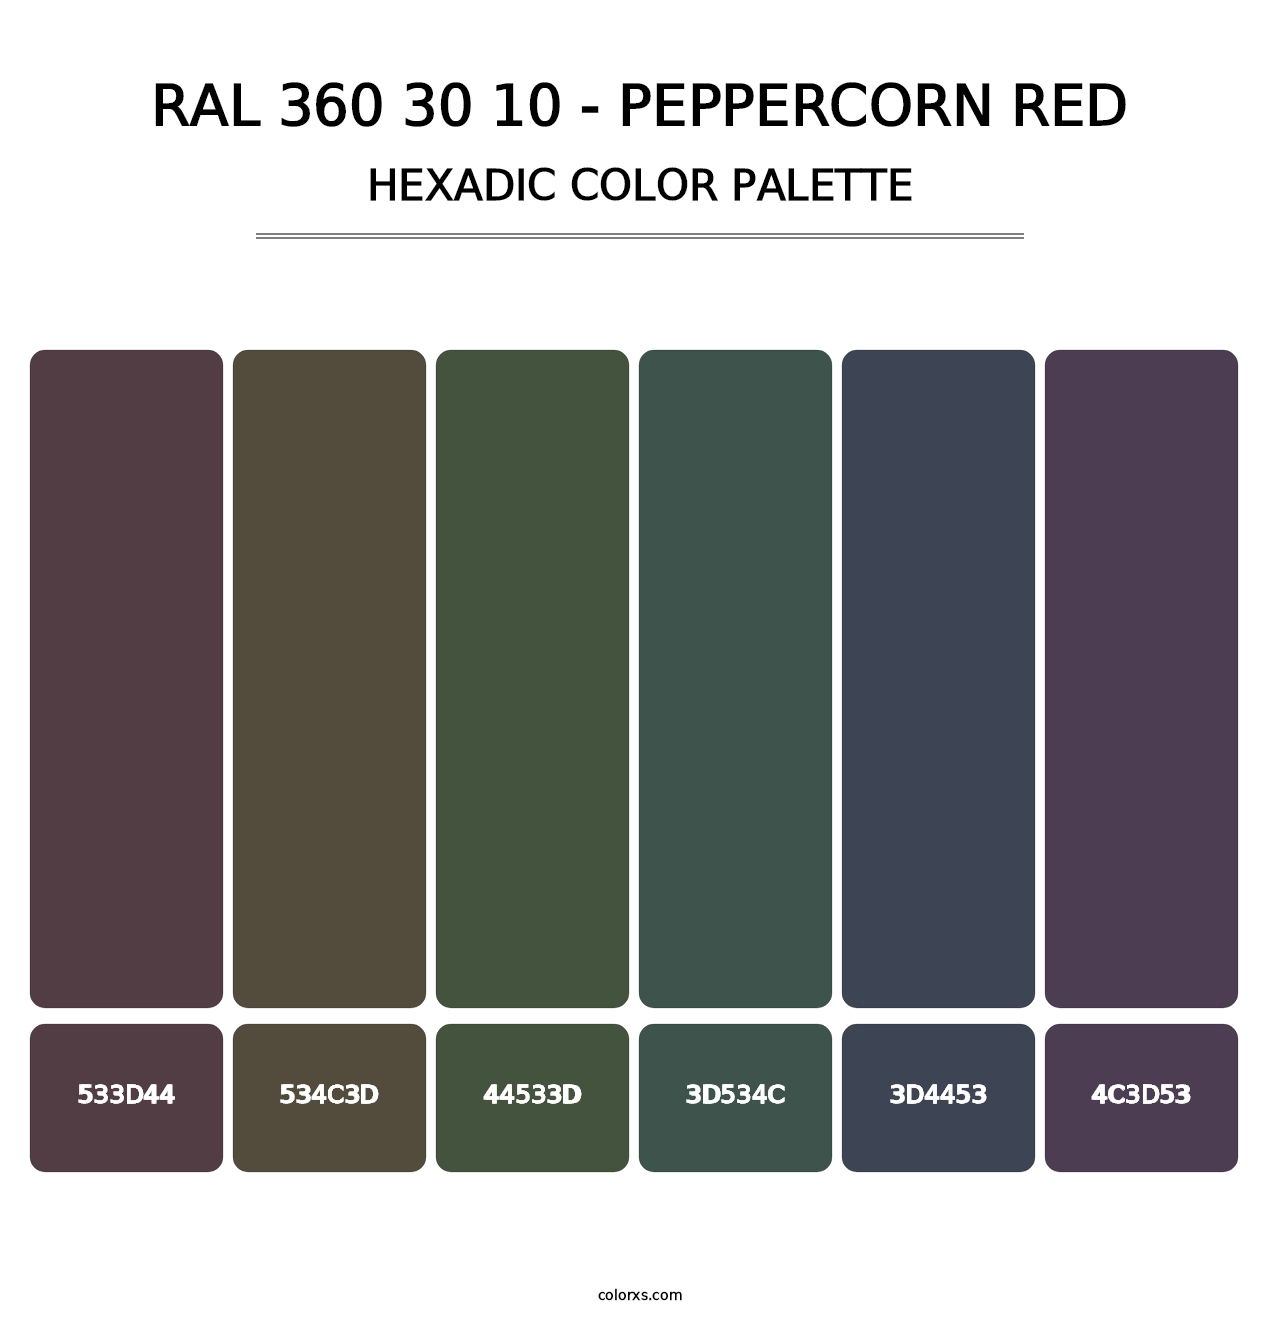 RAL 360 30 10 - Peppercorn Red - Hexadic Color Palette